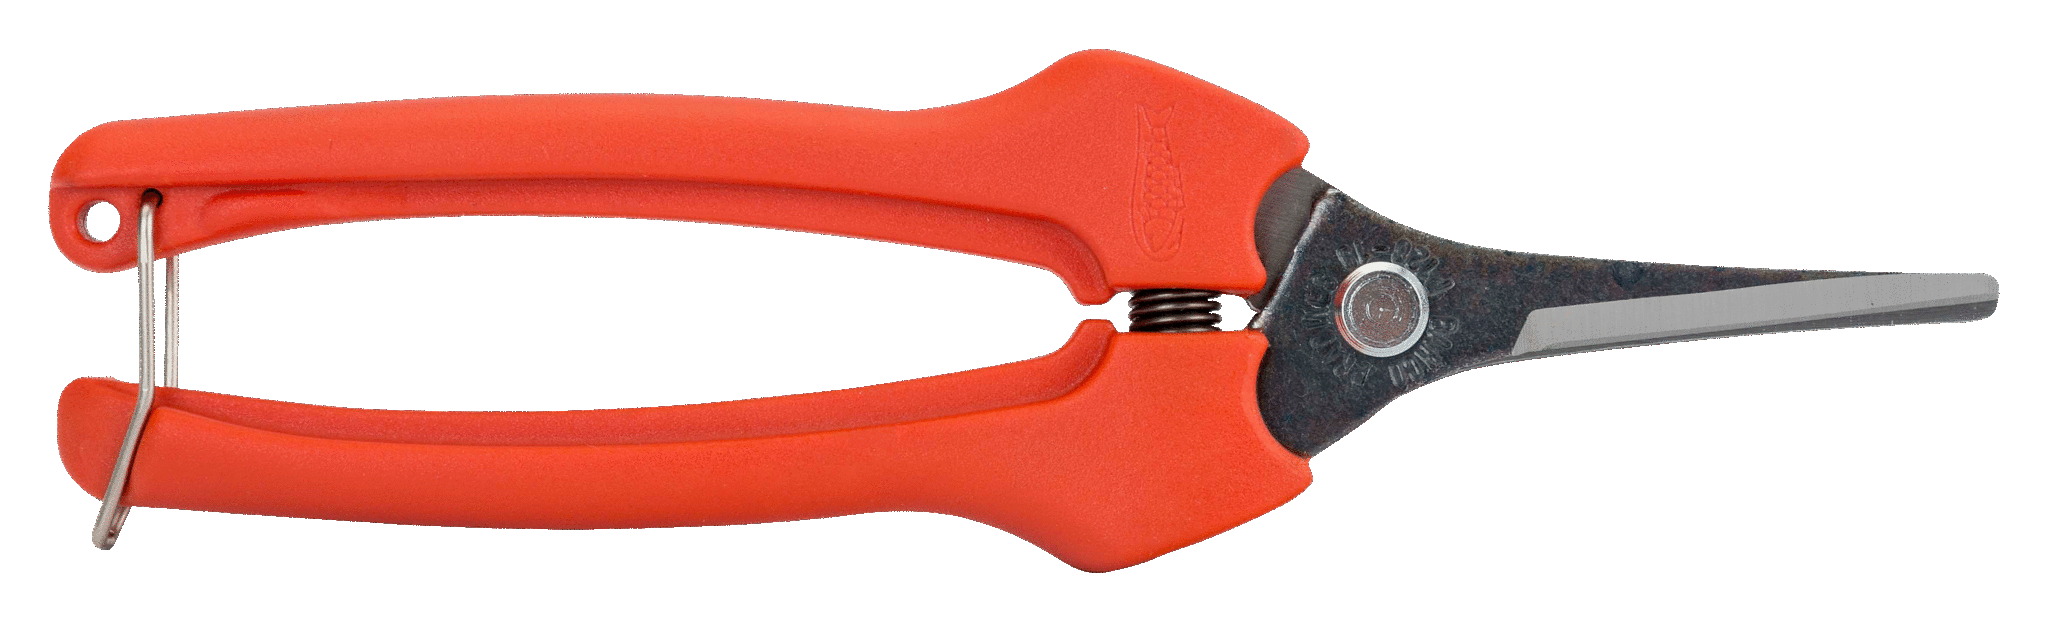 Grape Harvesting Straight Short Snips with Fibreglass Handle P128-19 by Bahco